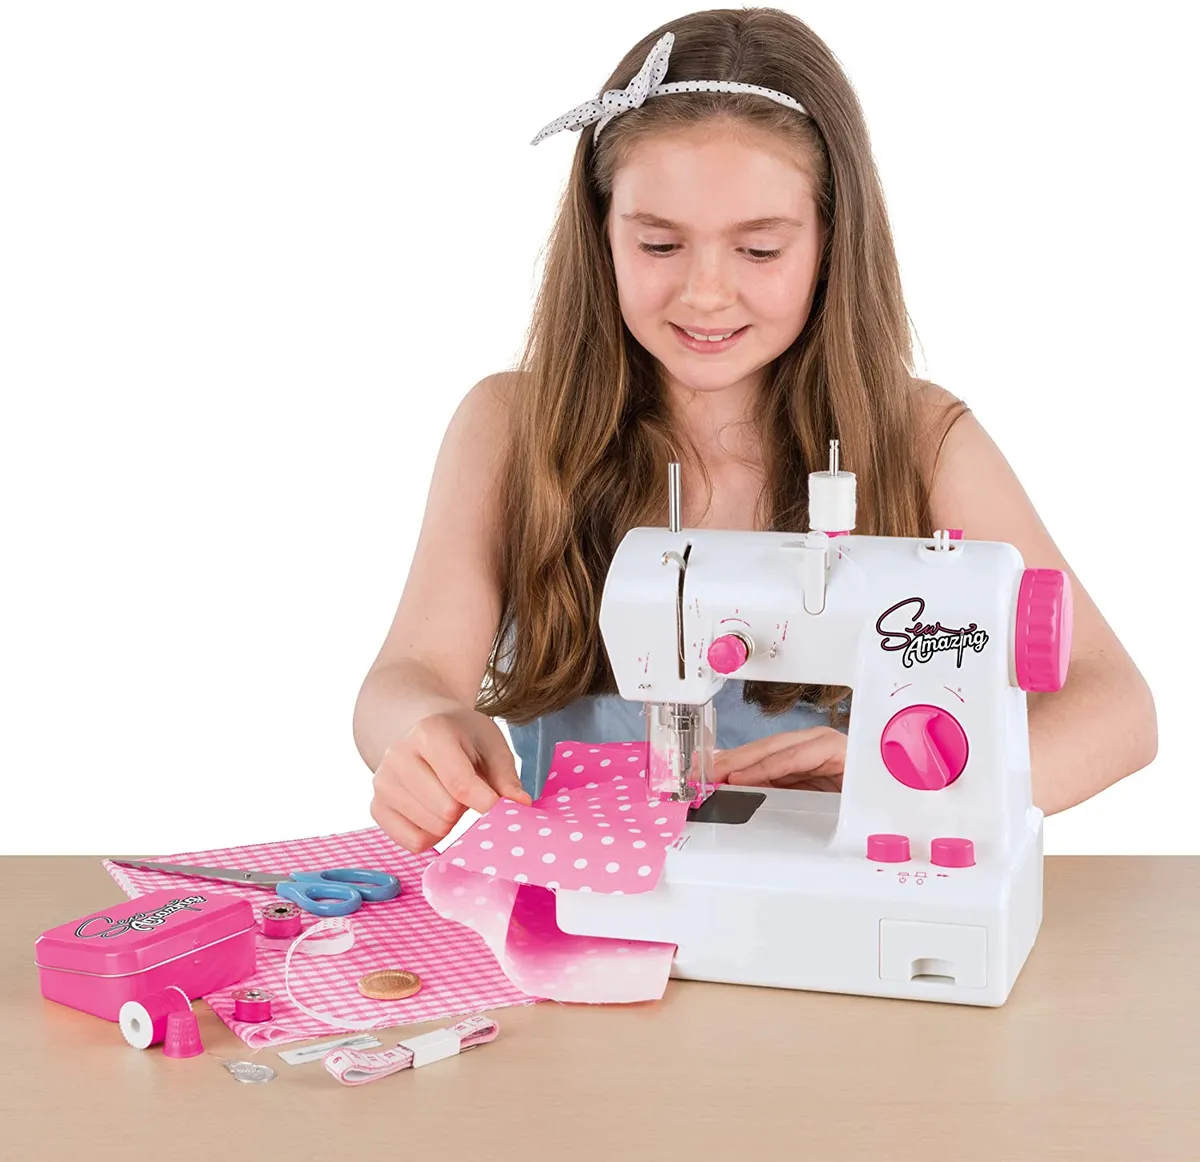 1 Set Portable Kids Sewing Machine Toy Educational Interesting Toy for Kids